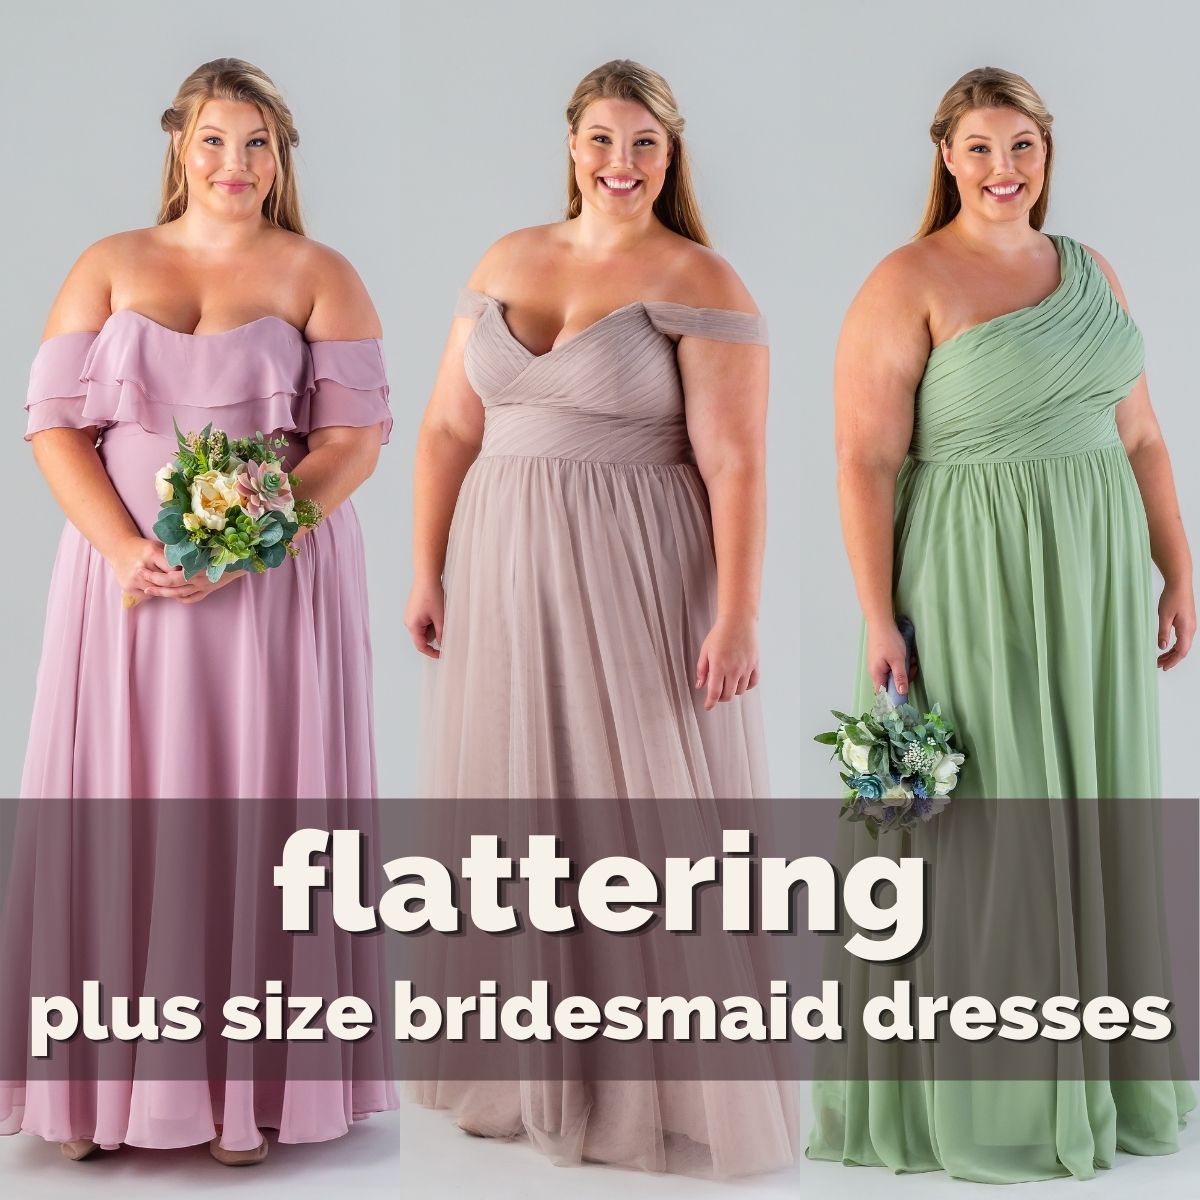 Plus Size Bridesmaid Dresses to Complement Your Curves – Wedding